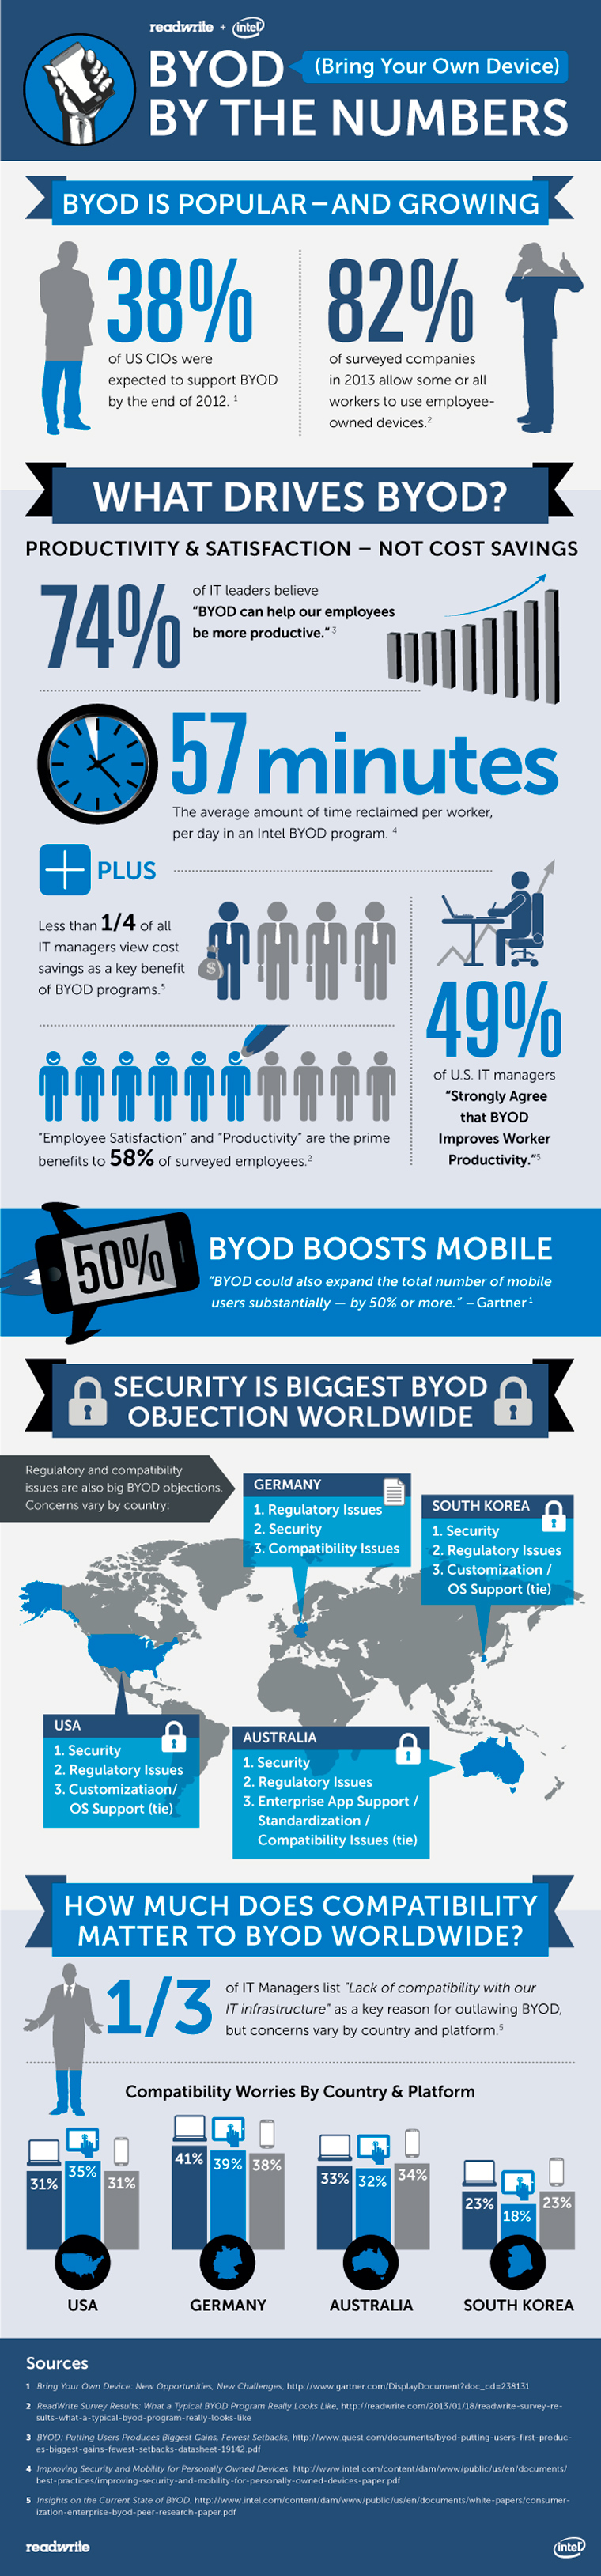 BYOD by the Numbers